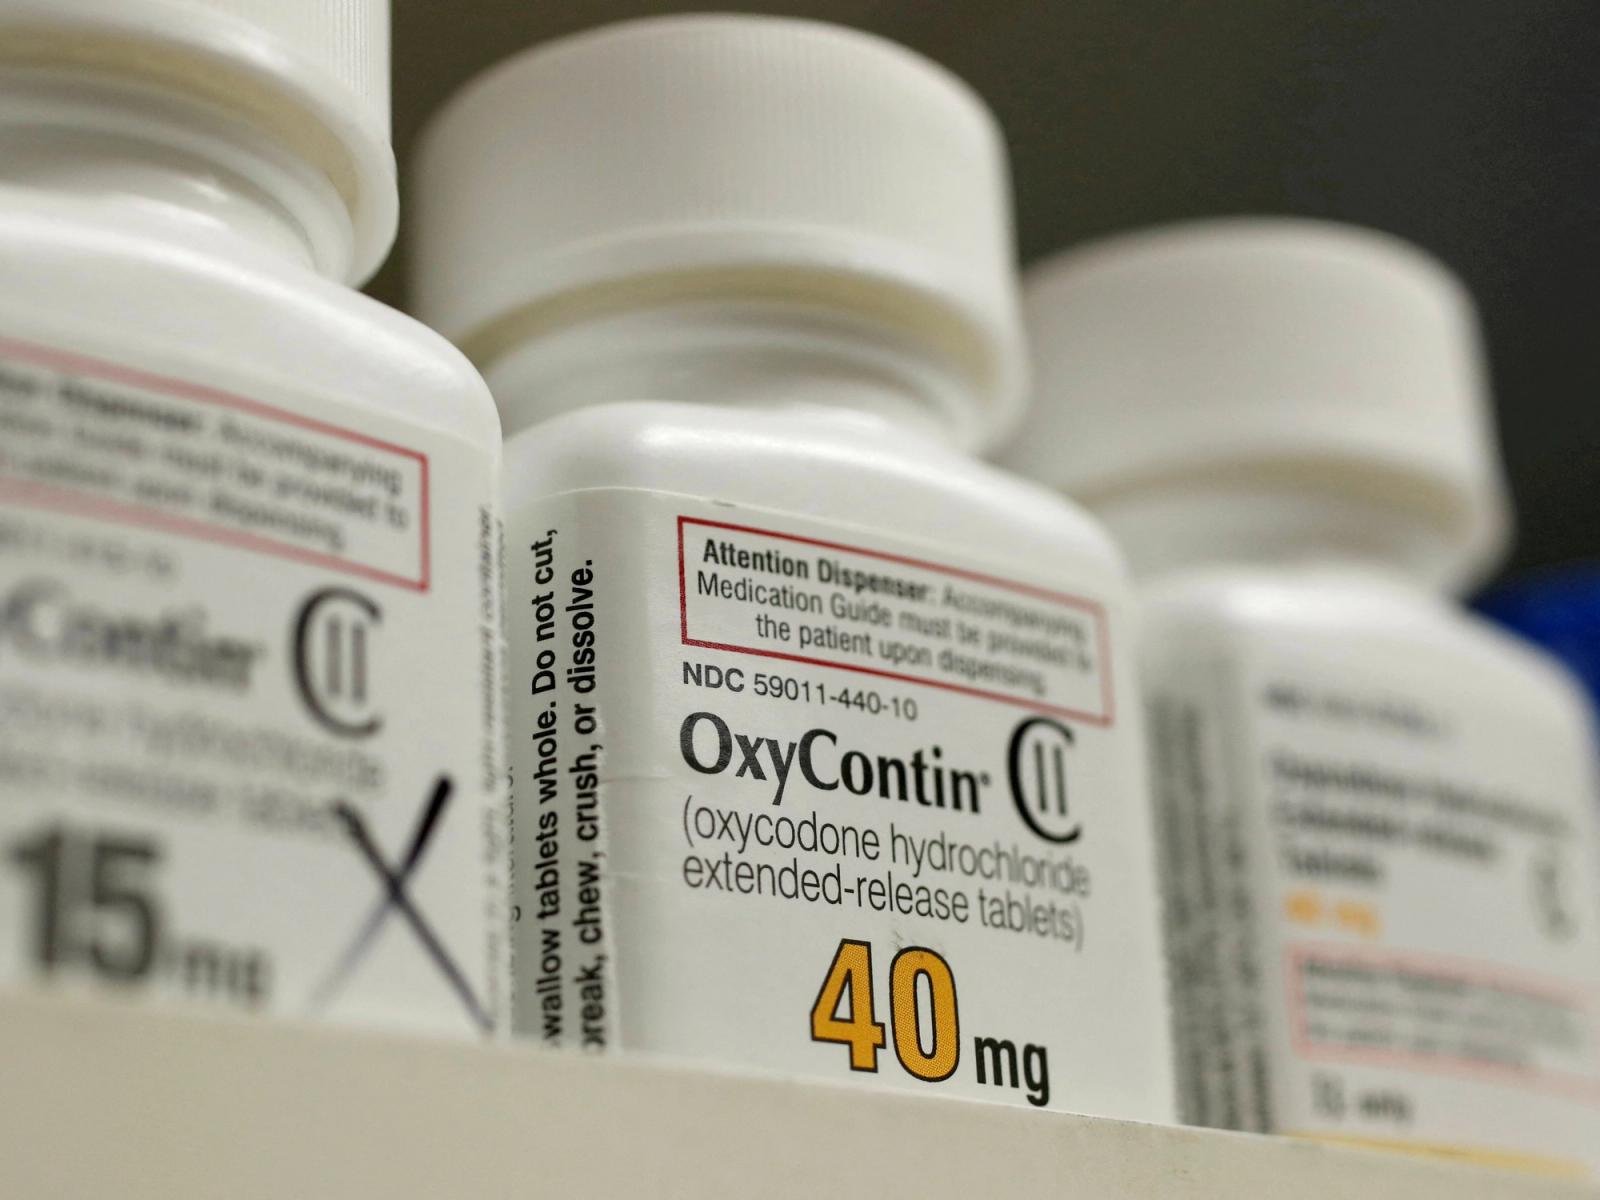 Bottles of prescription painkiller OxyContin made by Purdue Pharma LP sit on a shelf at a local pharmacy in Provo, Utah